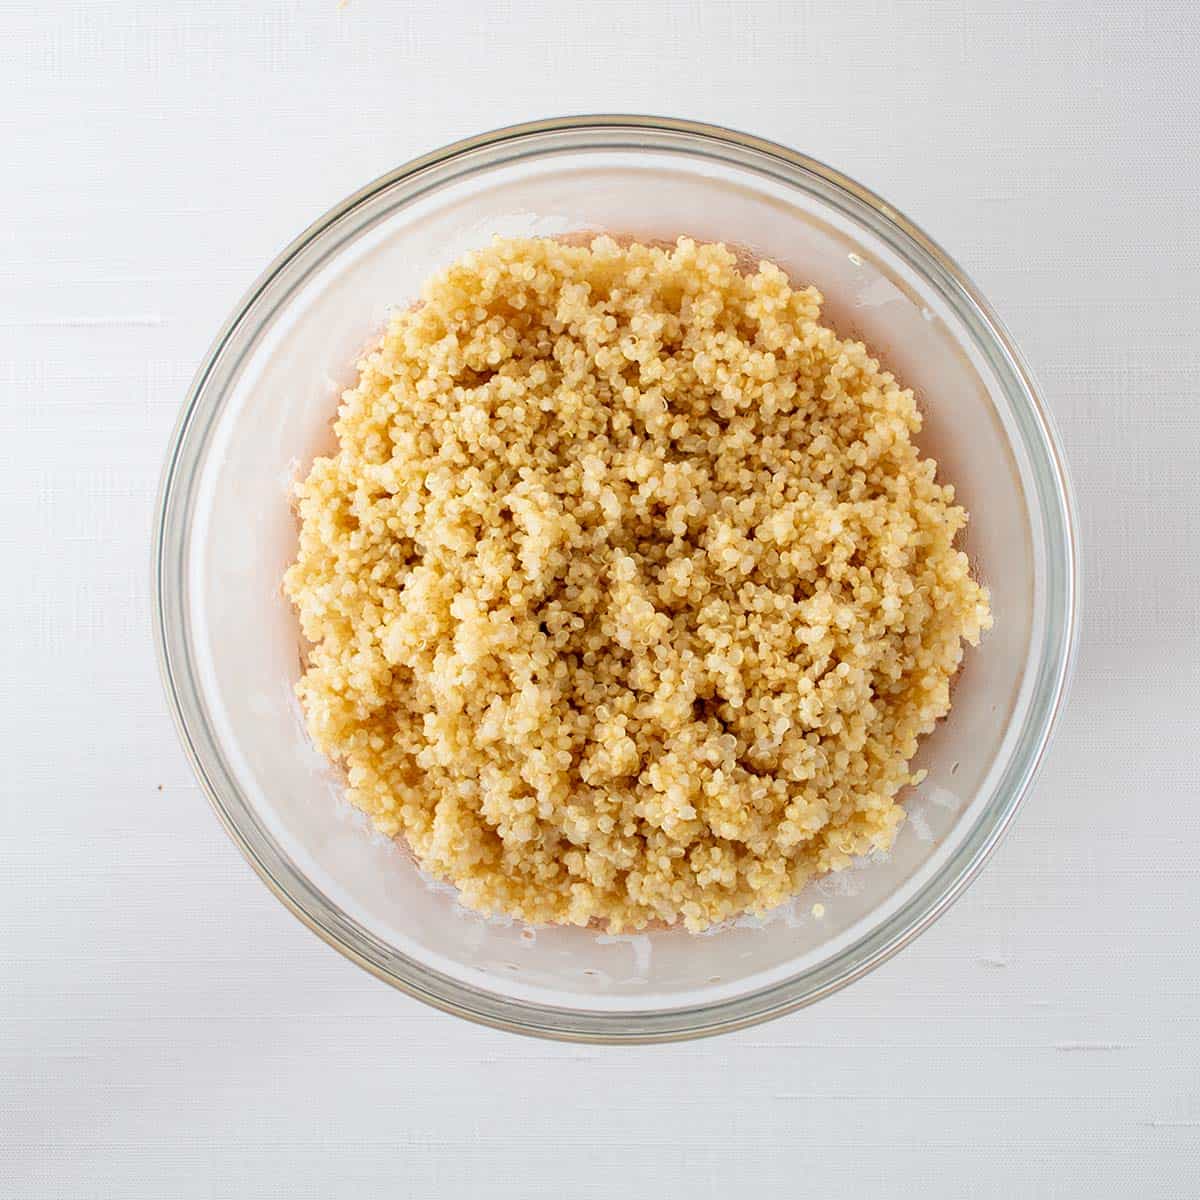 cooked quinoa in a clear glass mixing bowl.